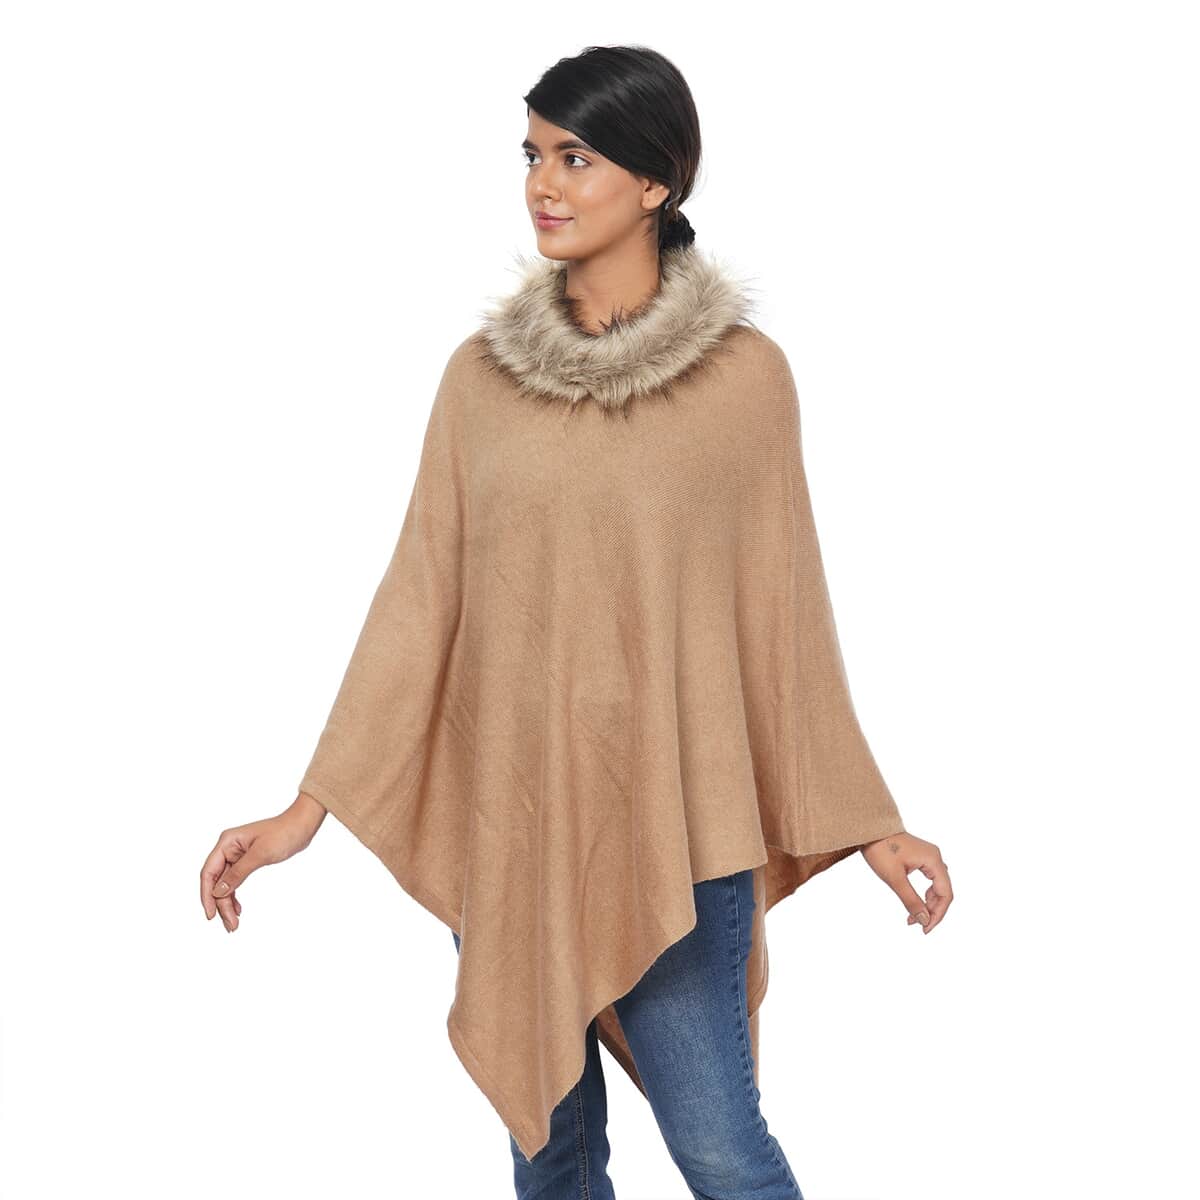 Beige 100% Cashmere Wool V-Shape Poncho with Faux Fur Collar (One Size Fits Most) image number 1